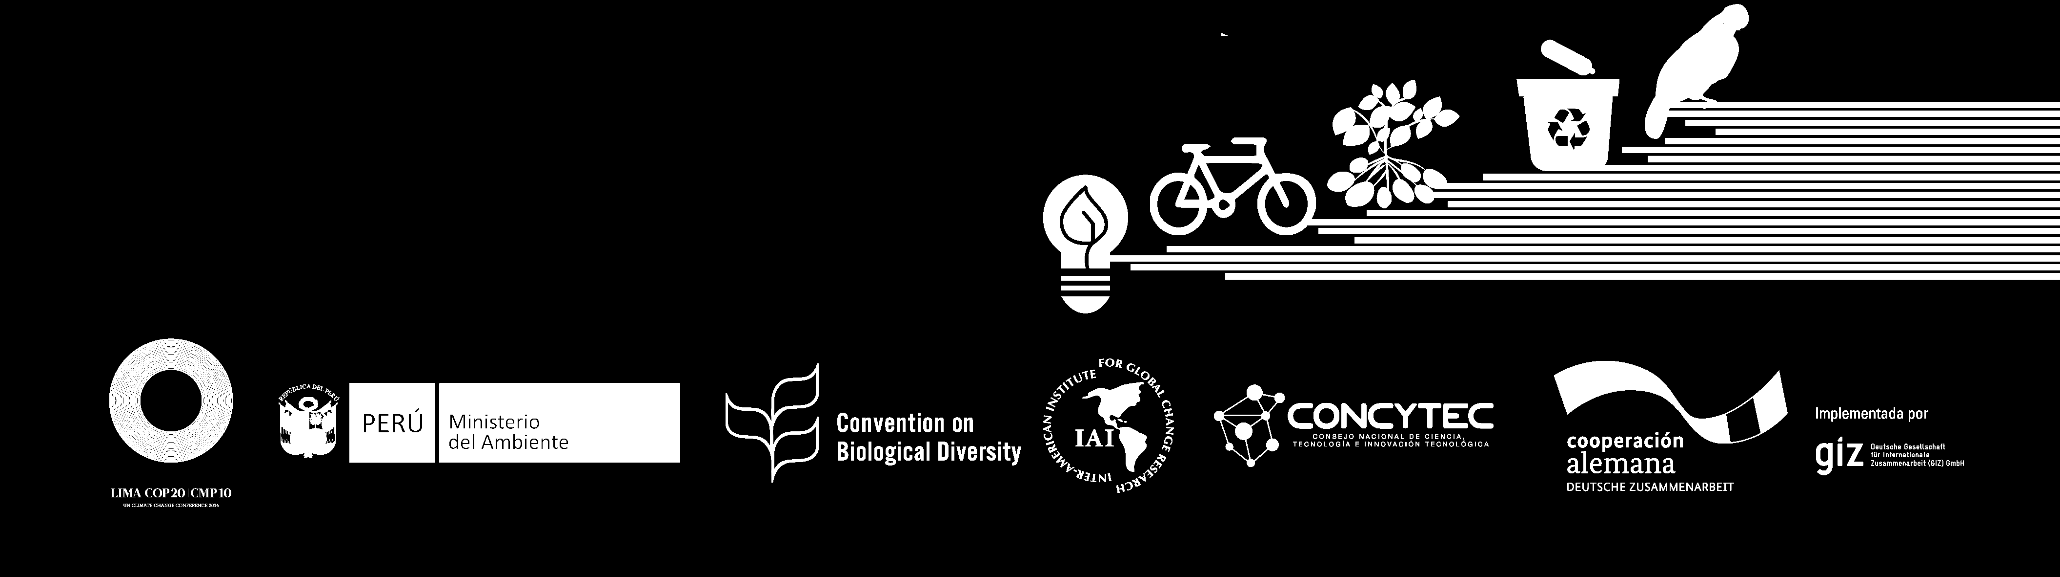 International Symposium Biodiversity and Climate Change Contributions From Science to Policy for Sustainable Development Lima, 27th and 28th of November, Lima 2014 Consideraciones sobre el